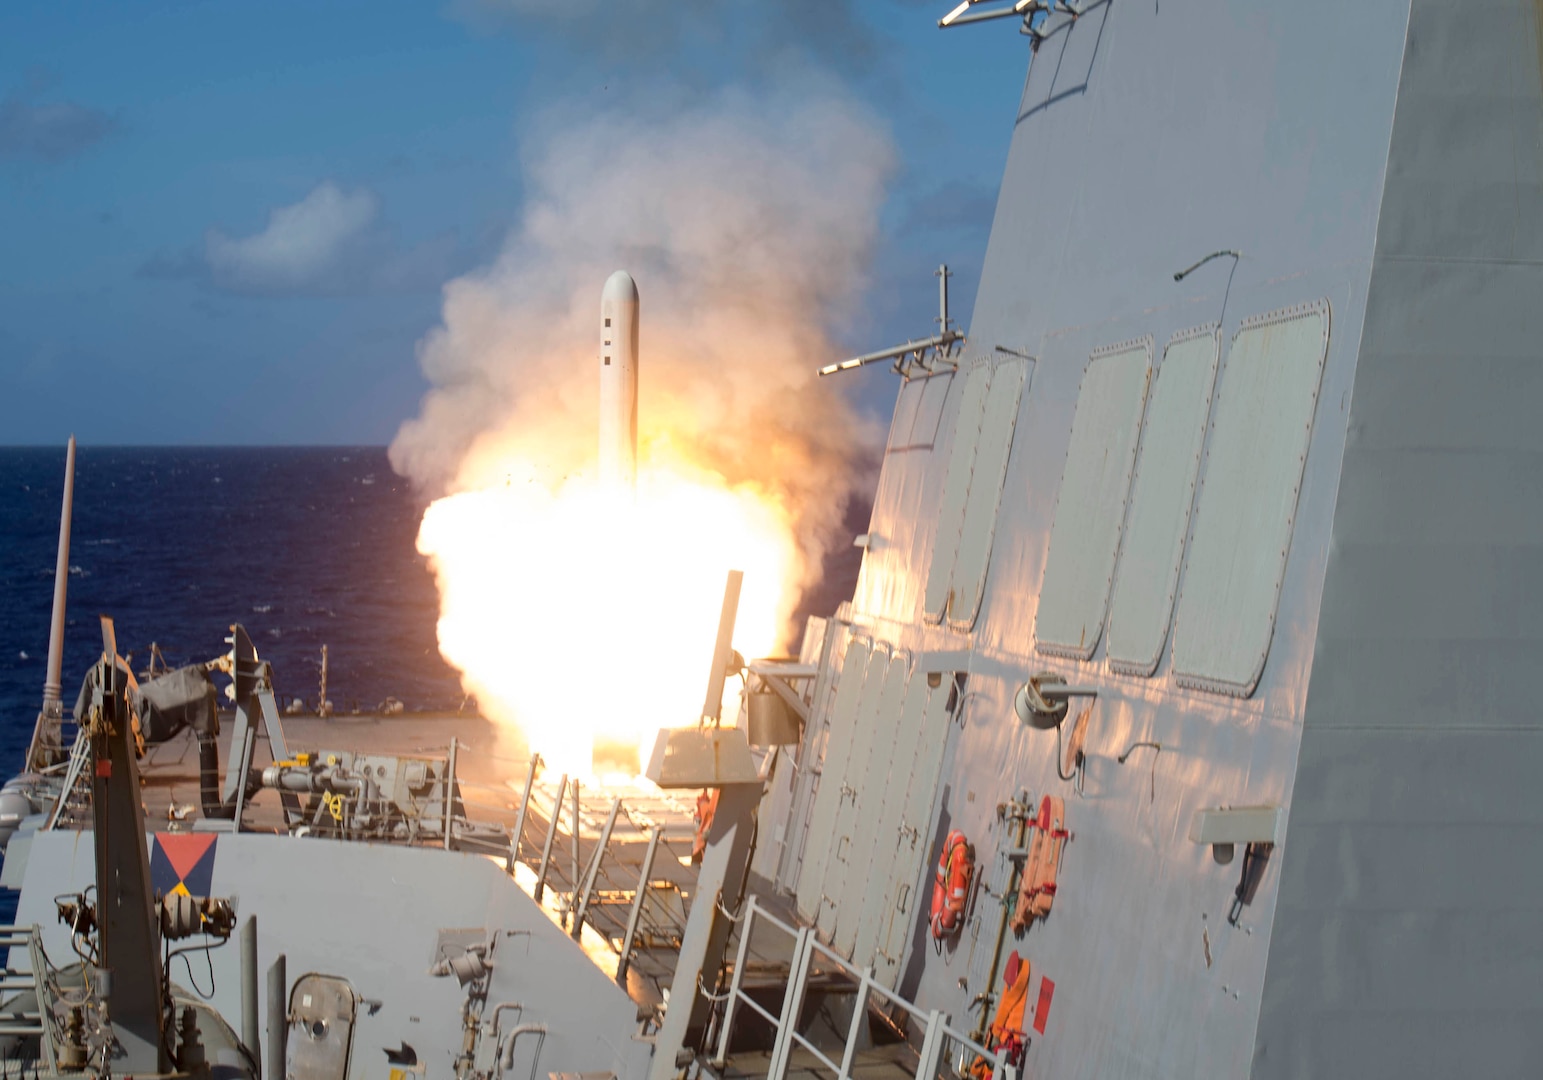 IMAGE: PACIFIC OCEAN – A Tomahawk cruise missile launches from the Arleigh Burke-class guided-missile destroyer USS Shoup (DDG 86) during a live-fire exercise as part of Valiant Shield 2018 in the Pacific Ocean. Naval Surface Warfare Center Dahlgren Division (NSWCDD) institutionalized its Technical Excellence Framework to make a difference in the Fleet in terms of capability, quality, security and safety of warfare mission critical products – including system development and products supporting the Tomahawk cruise missile – the command announced, Aug. 13, 2019. Dahlgren’s Technical Excellence Framework - a set of project execution requirements, training, internal project reviews, technical excellence metrics and data-driven continuous improvement - applies to all NSWCDD technical programs and projects. Over the course of seven years, the command’s Chief Engineer Council worked to achieve their vision of institutionalizing technical excellence, rigor and discipline in order to meet the primary goal of consistently and efficiently developing safe, secure, reliable, maintainable, and high-quality products and systems.